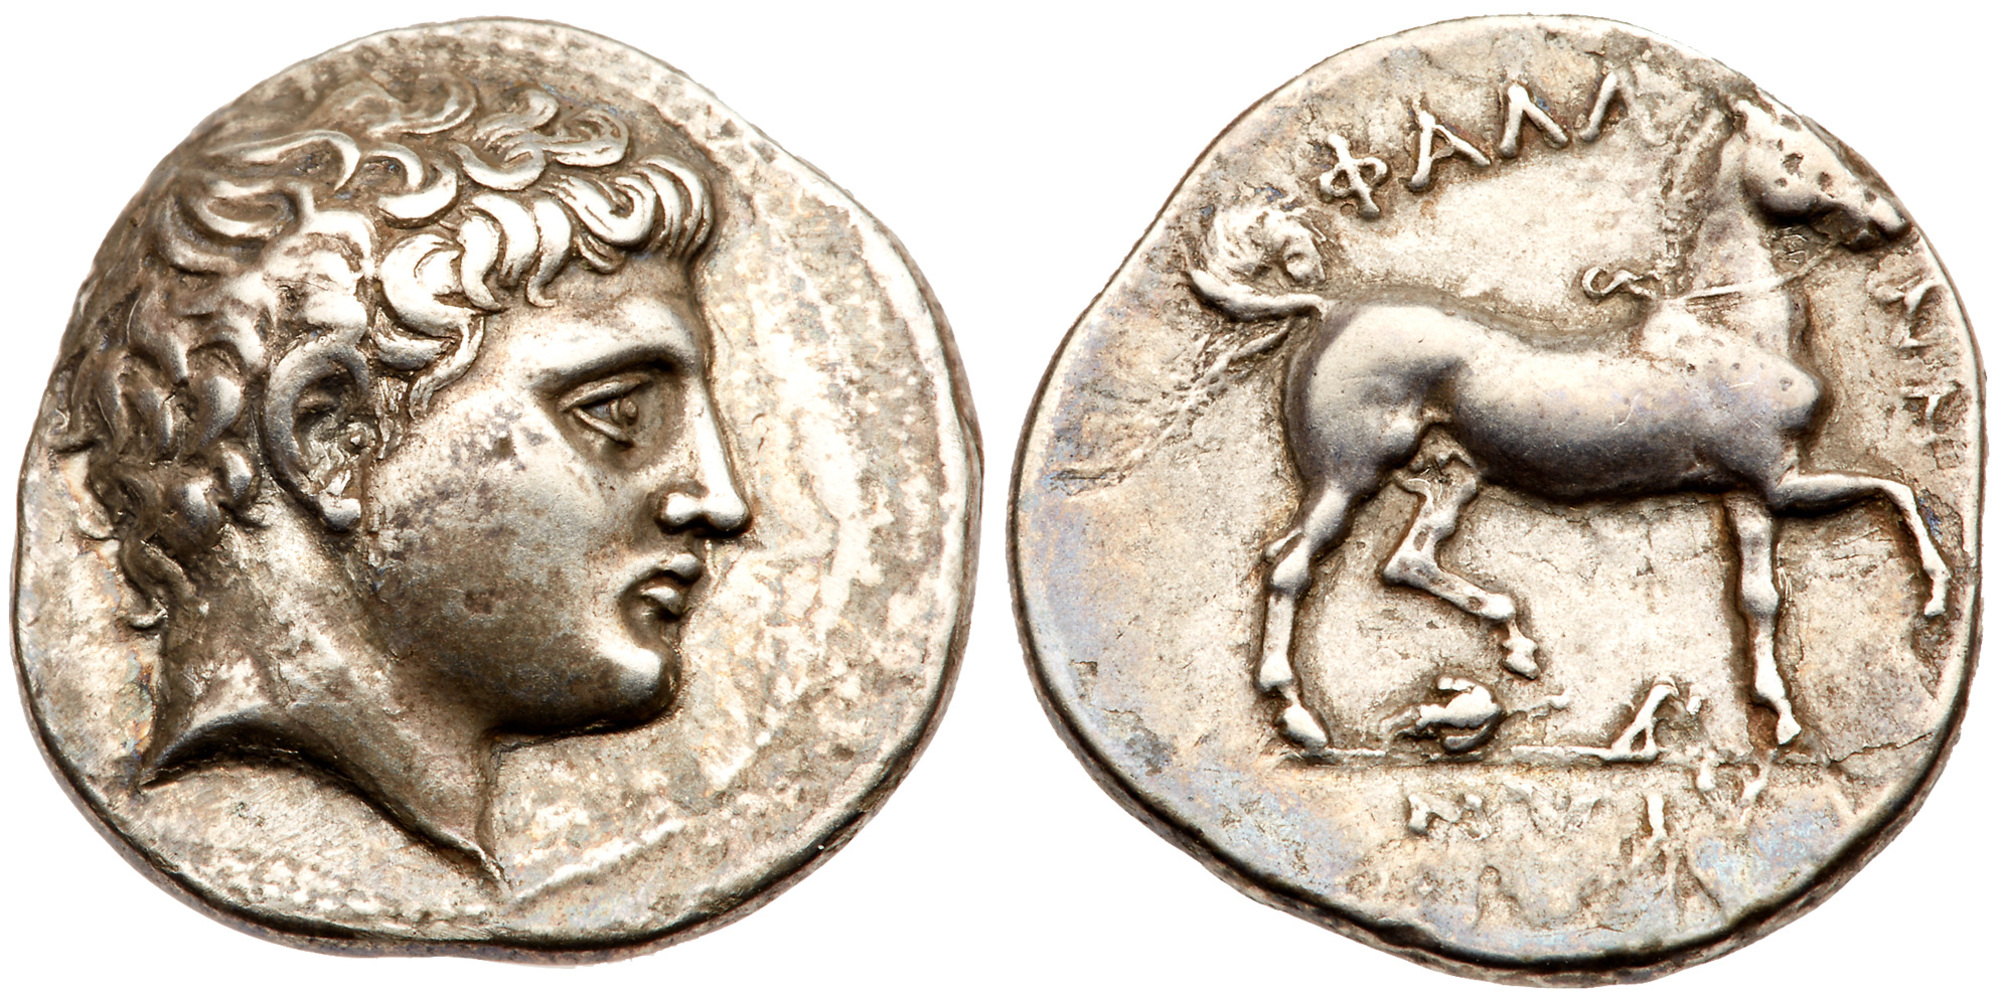 Thessaly, Phalanna. Silver Drachm (5.24 g), ca. 350-340 BC. Bare male head (Ares?) right. Reverse: